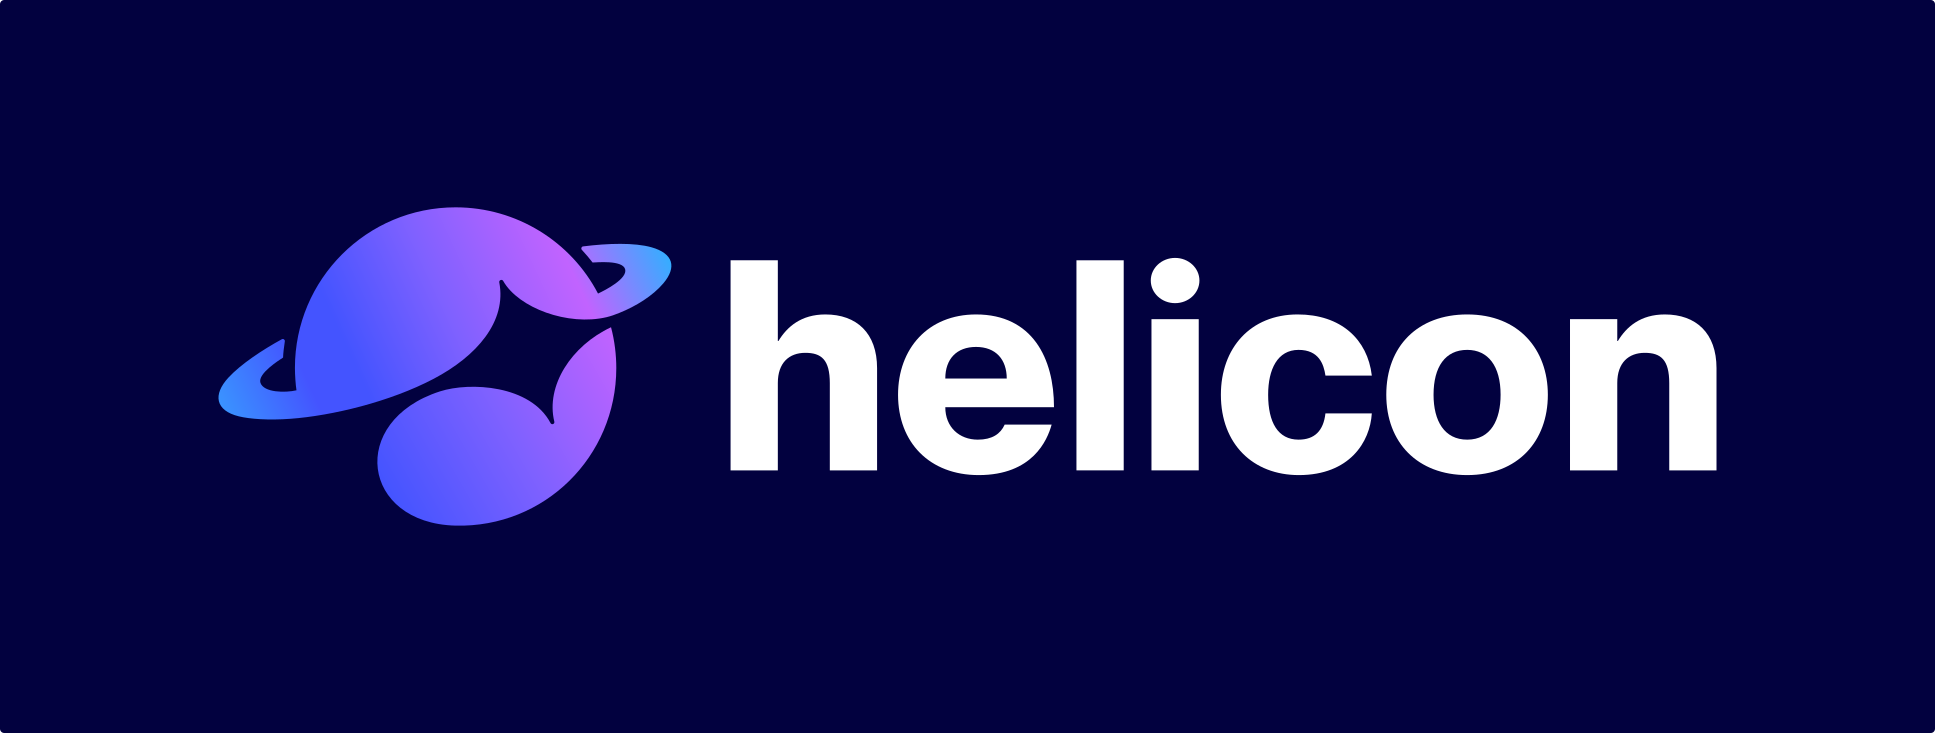 Company logo for helicon technologies AB